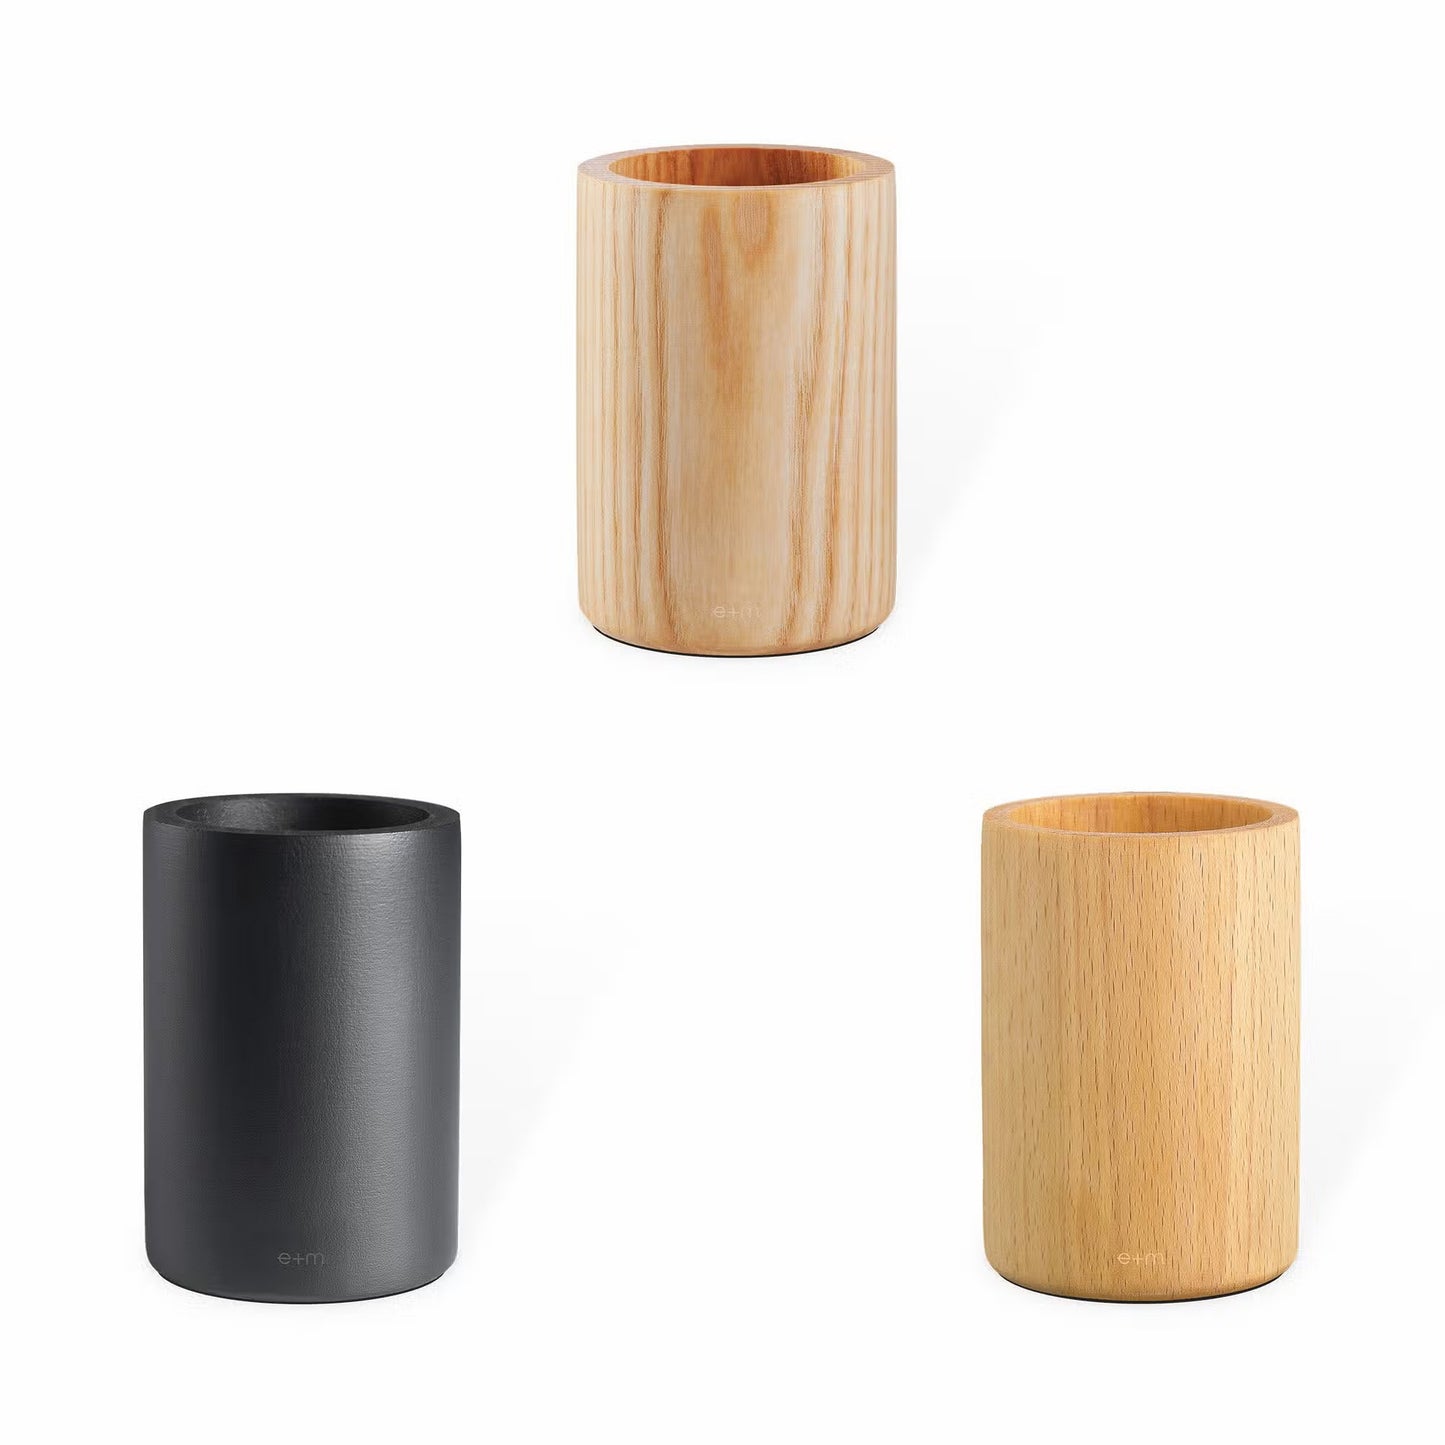 E+M Potbelly - Wood Pen Cups Made in Germany